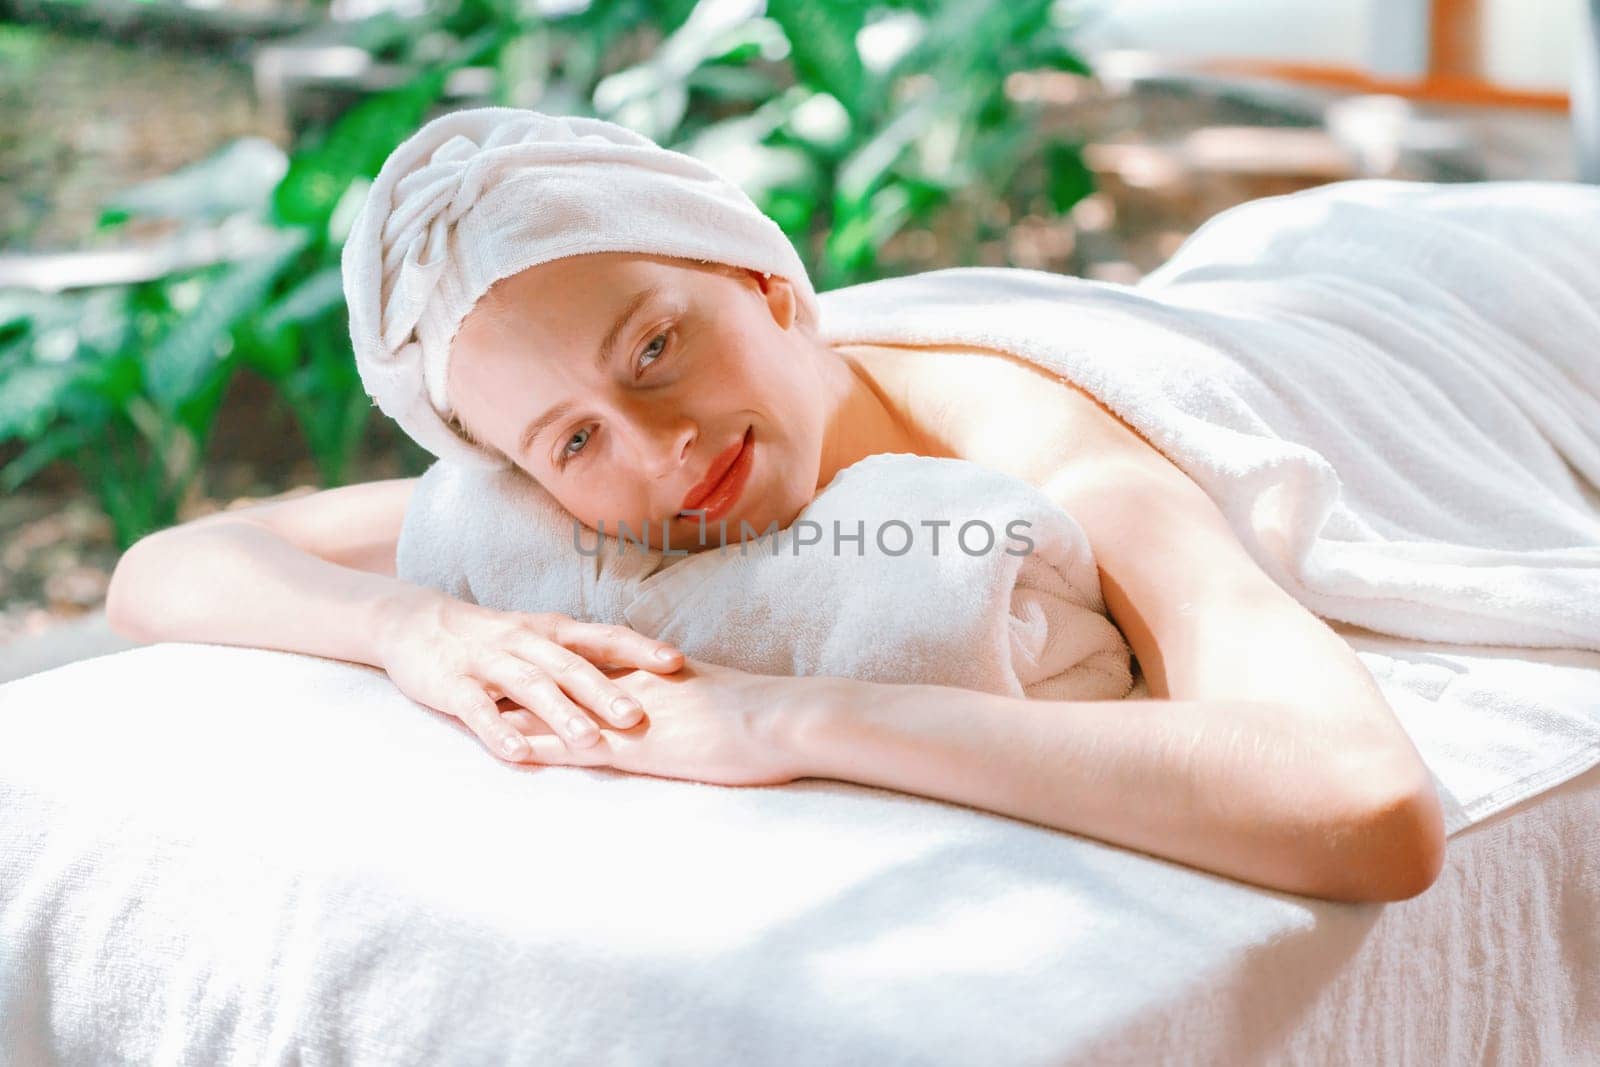 Beautiful young woman relaxes on a spa bed surrounded by nature. Tranquility by biancoblue